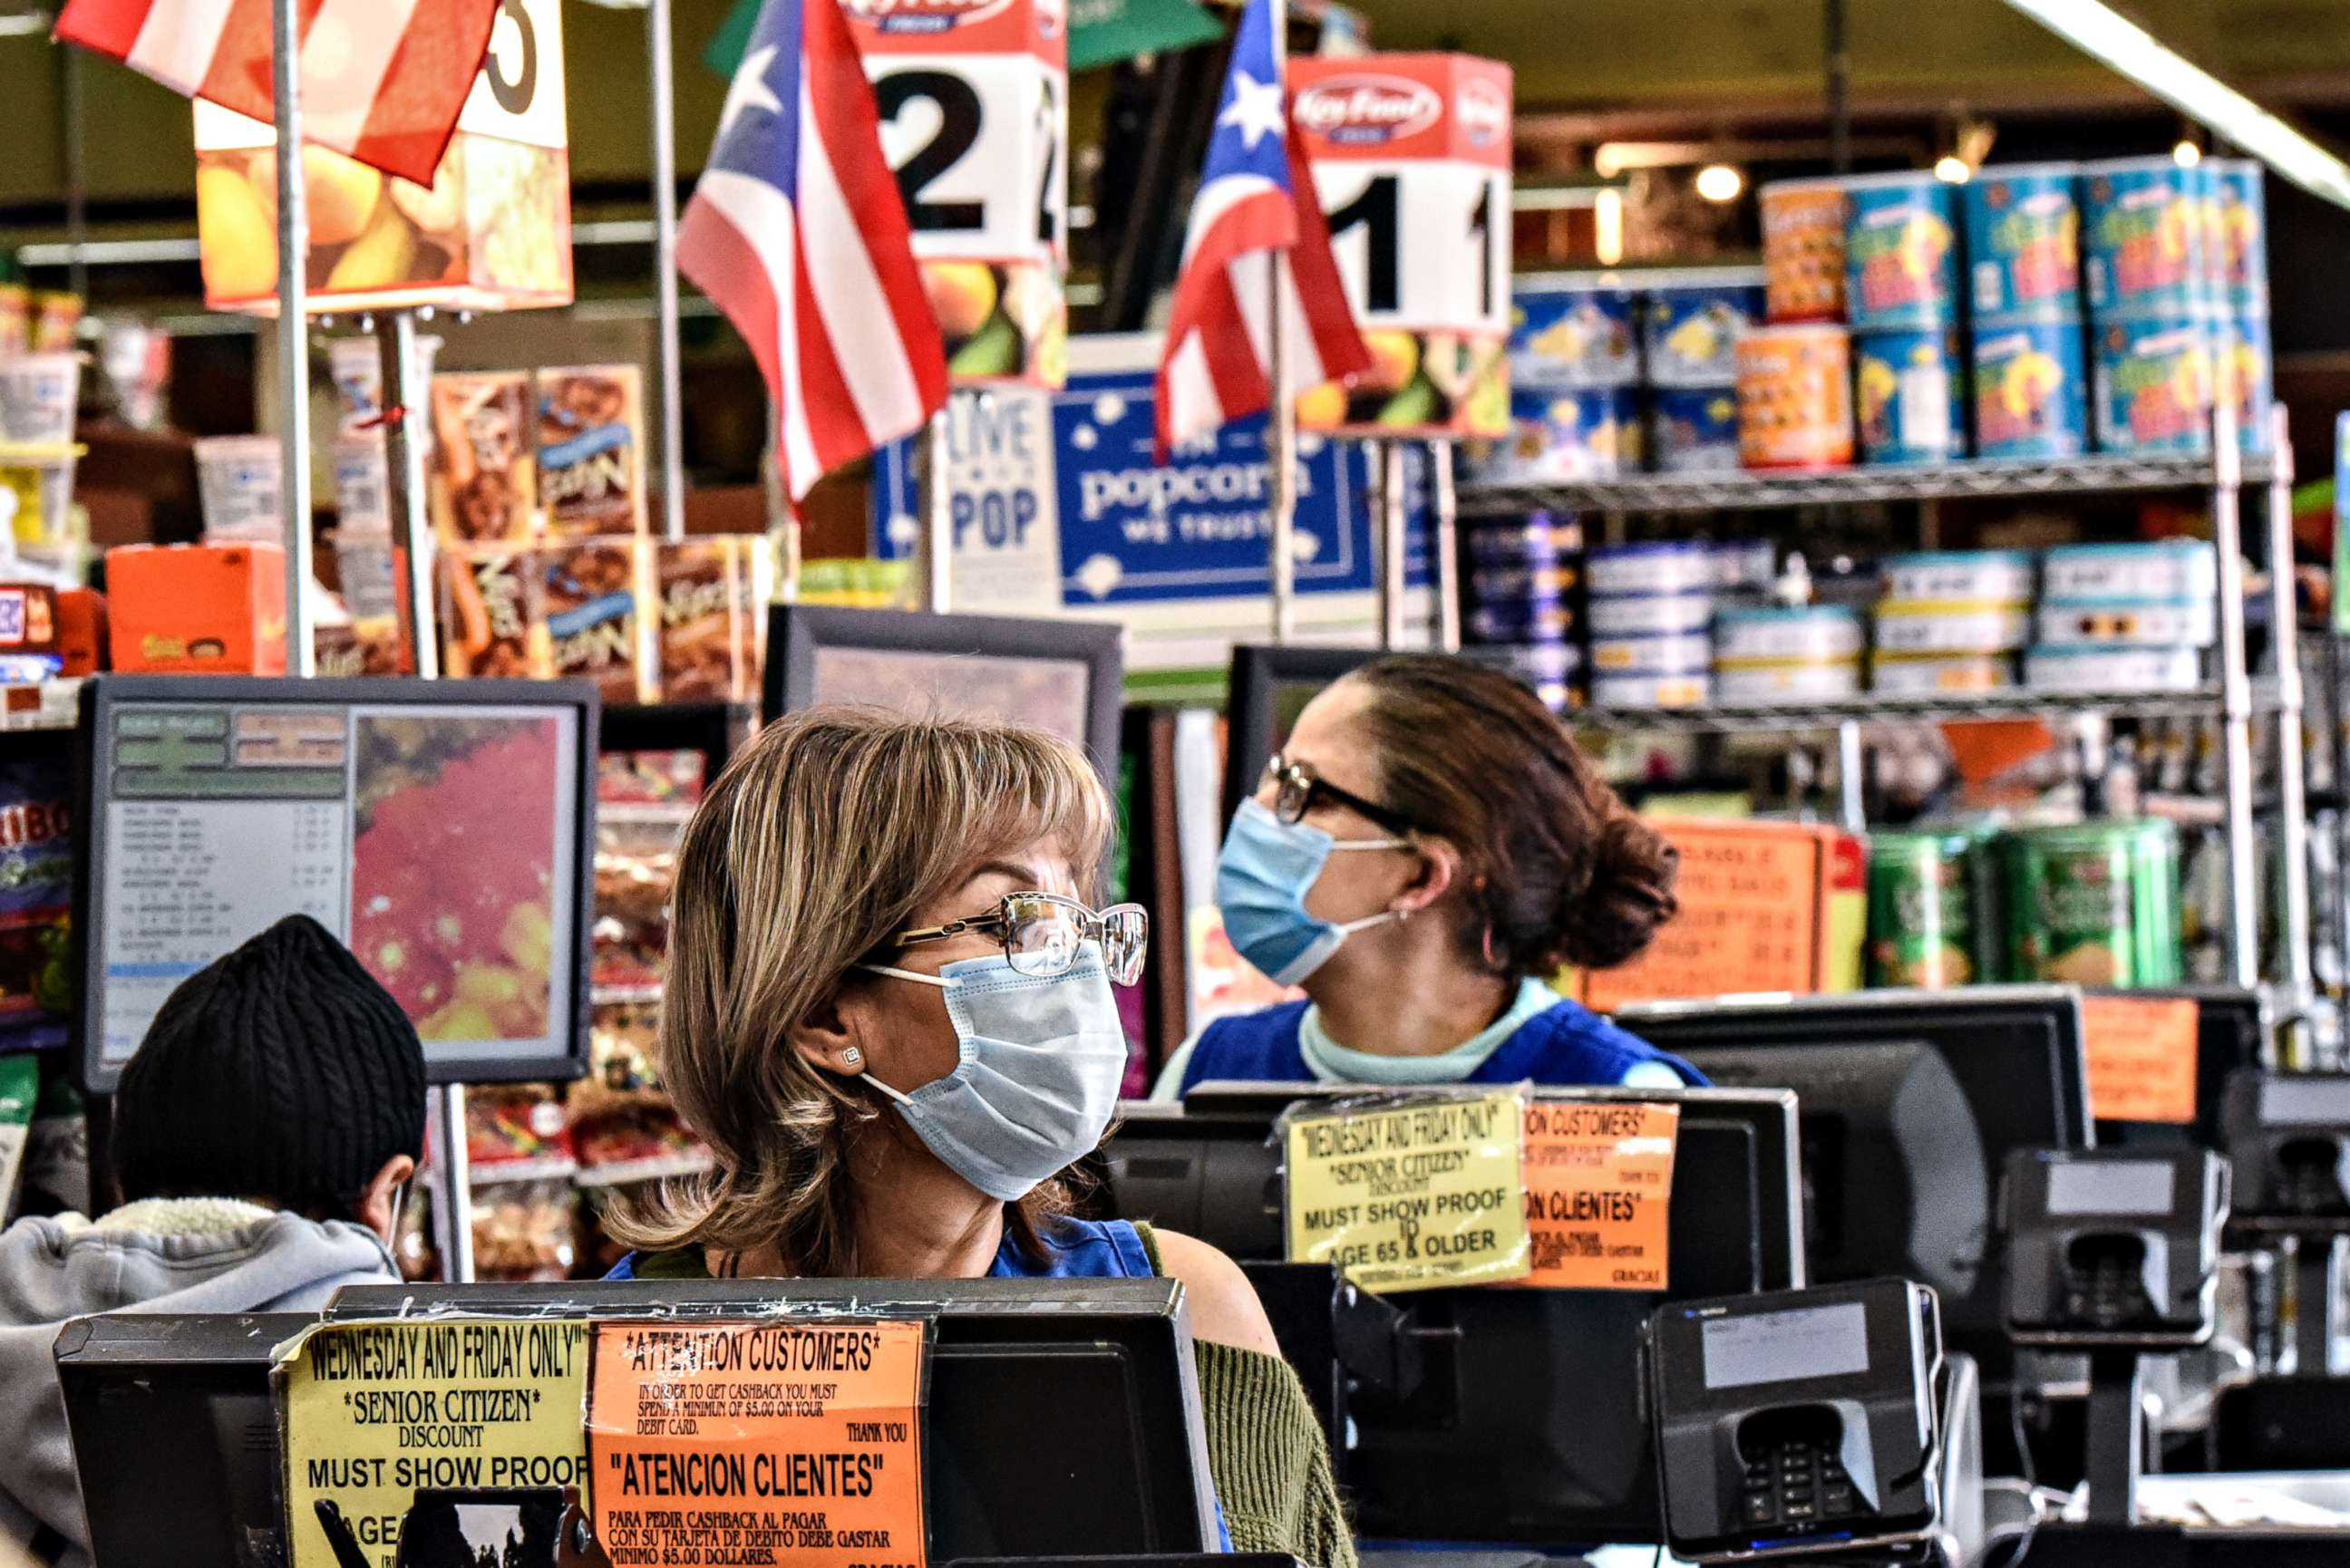 PHOTO: Cashiers work in a grocery store in the Bushwick neighborhood of Brooklyn during the COVID-19 pandemic,  on April 2, 2020, in New York City.